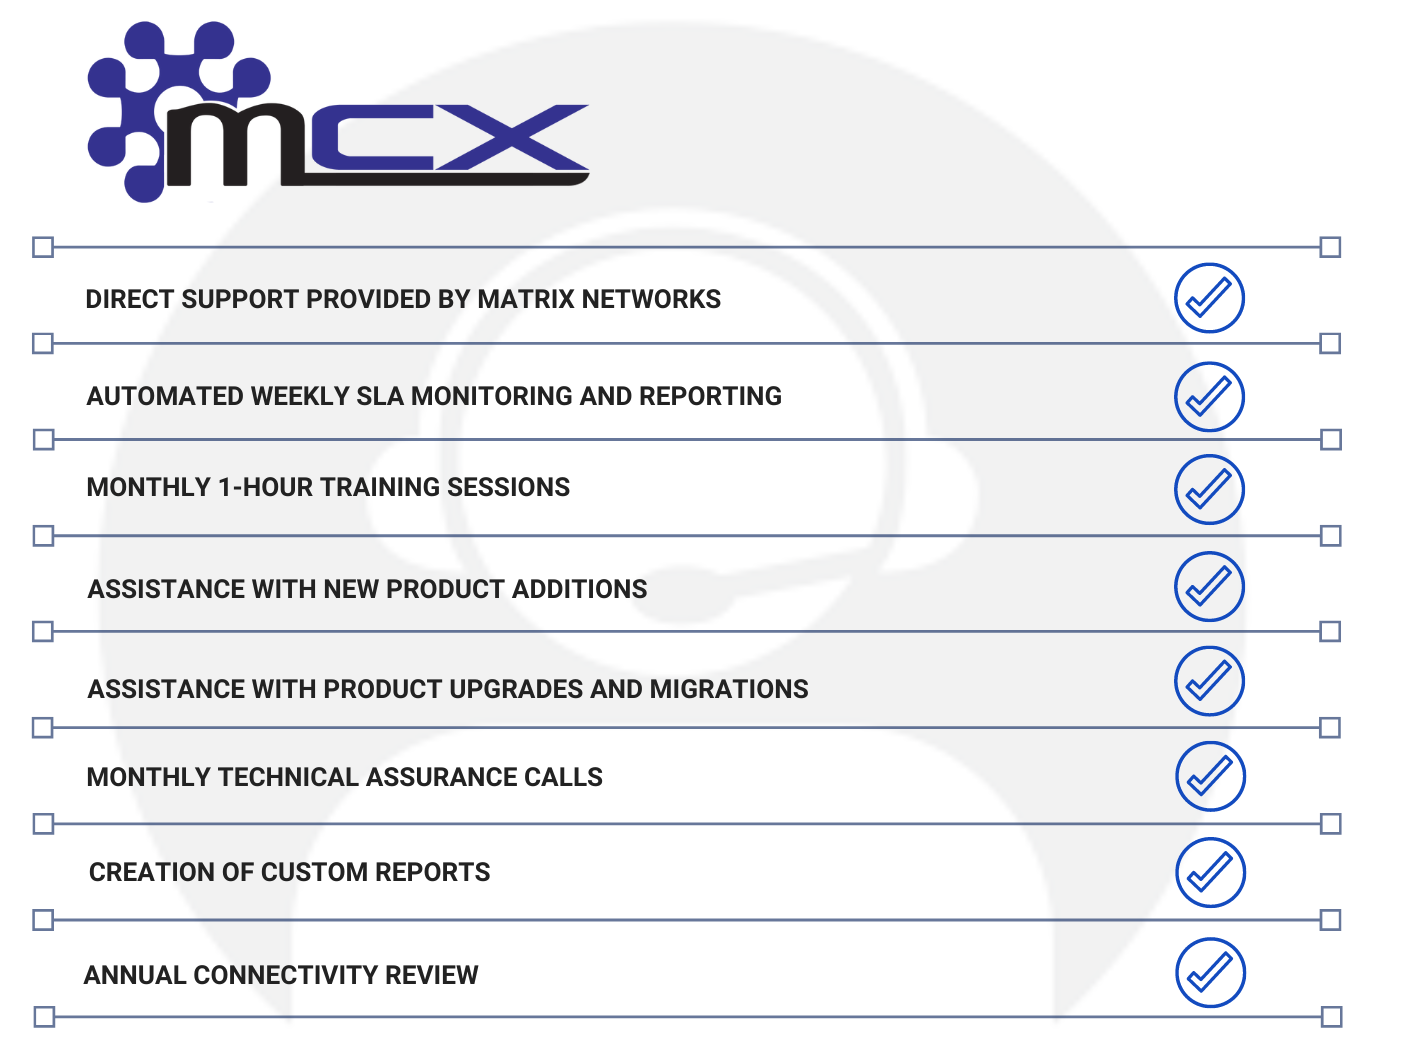 mCX features and benefits-1